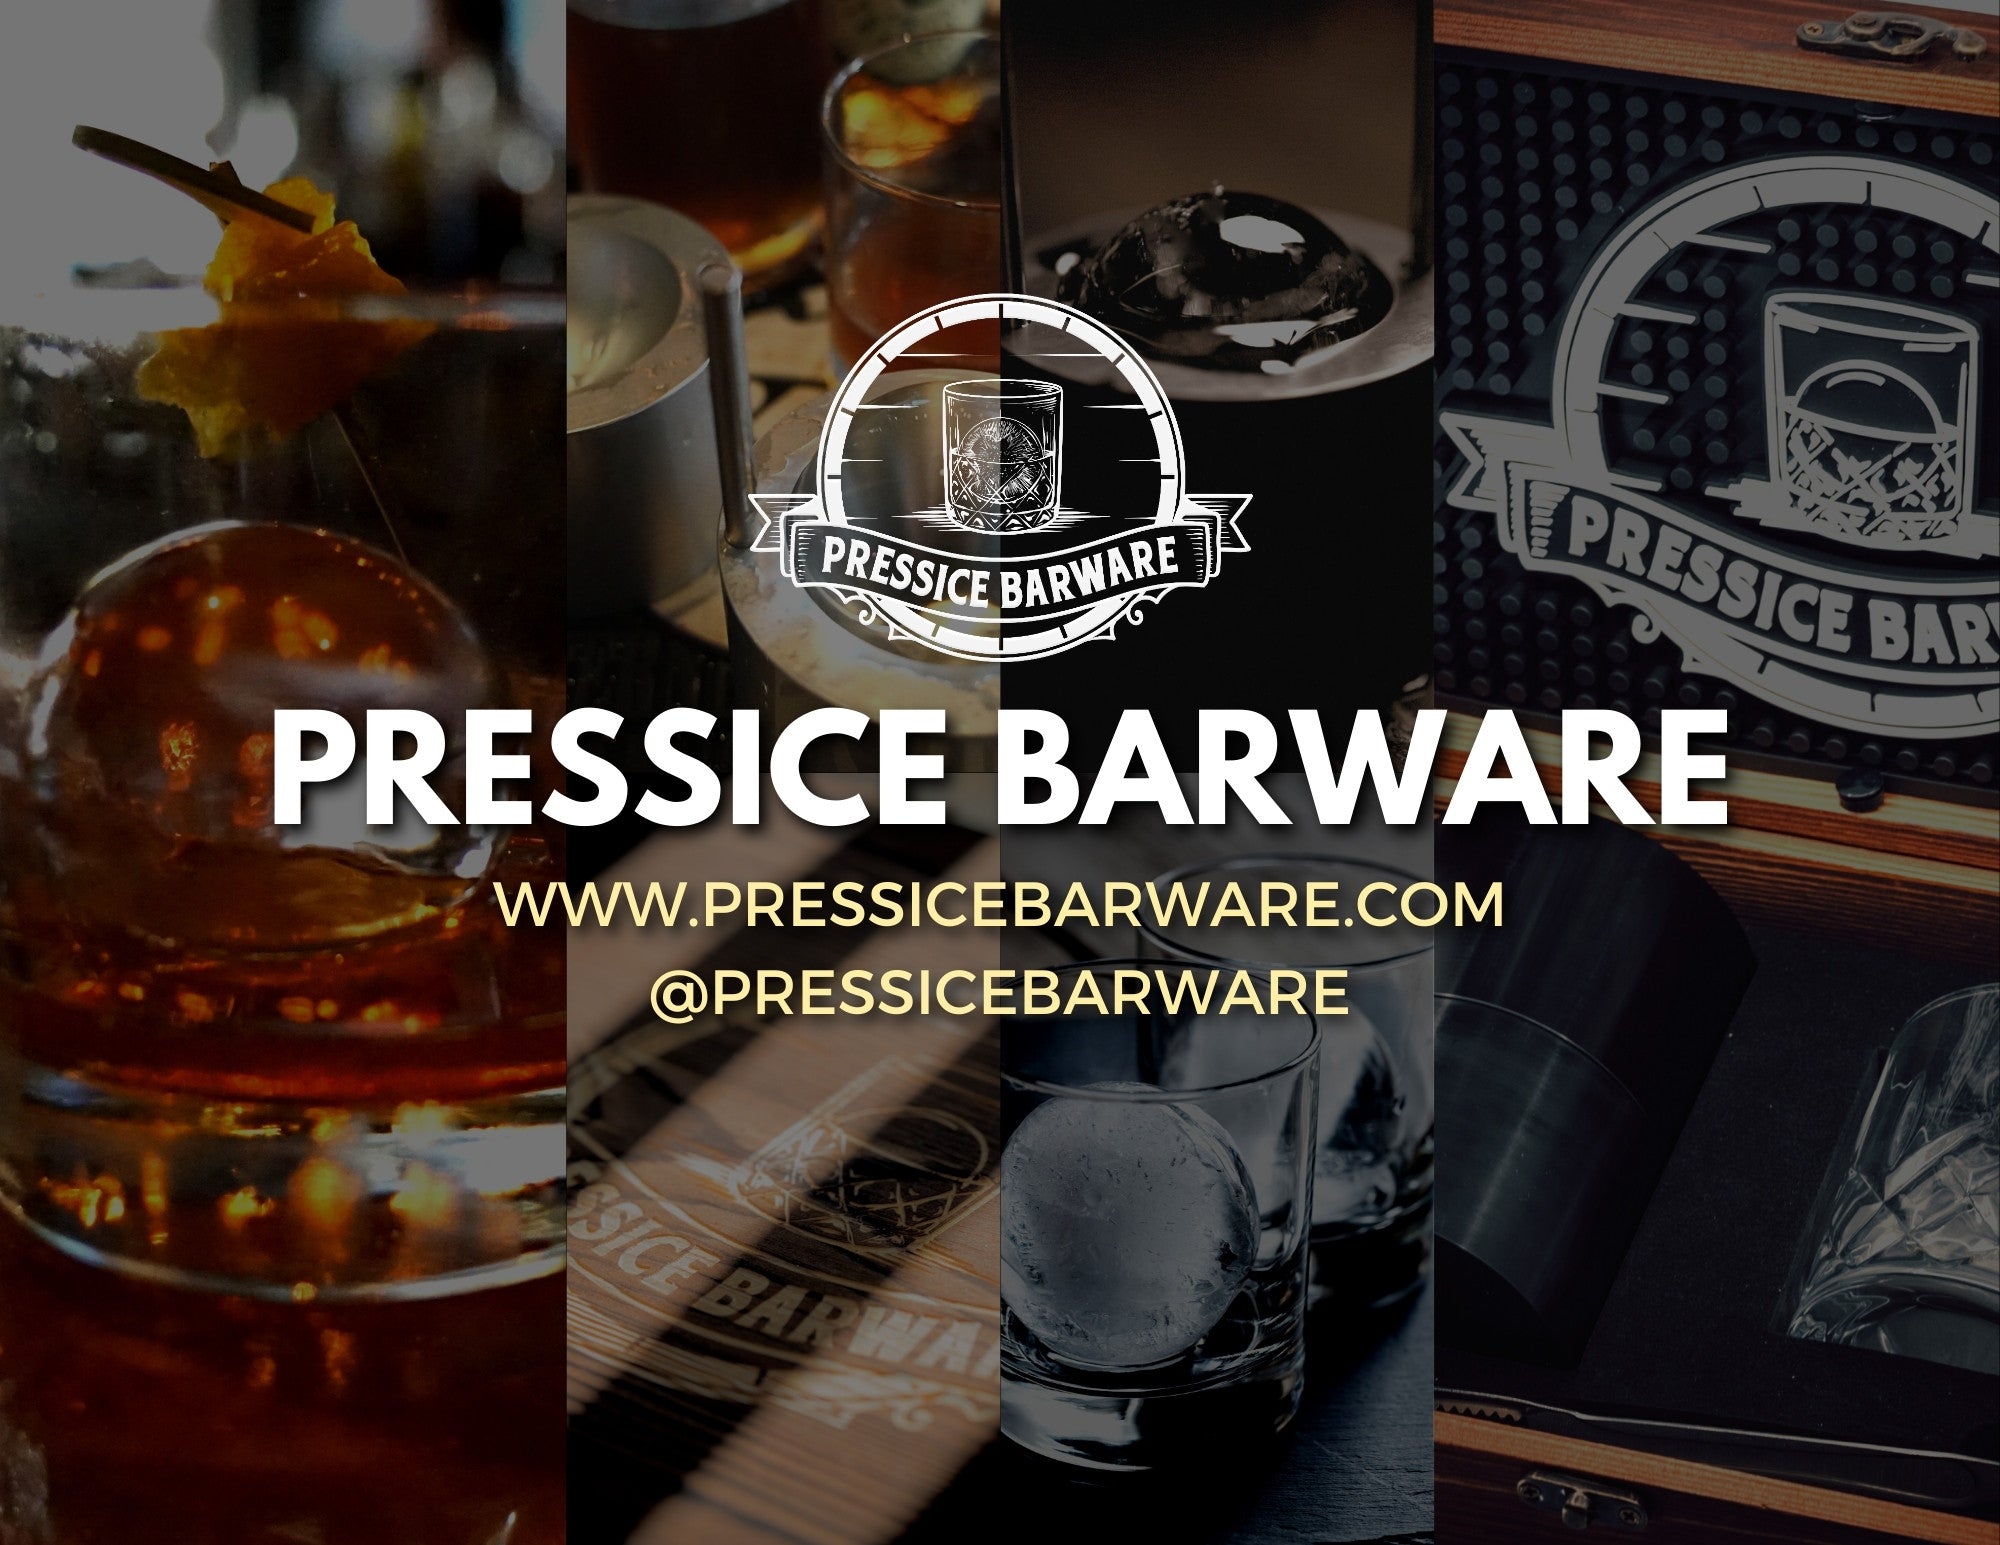 Contact Pressice Ice Ball Press Manufacturer and Distributor of quality ice presses made inthe USA social media handles